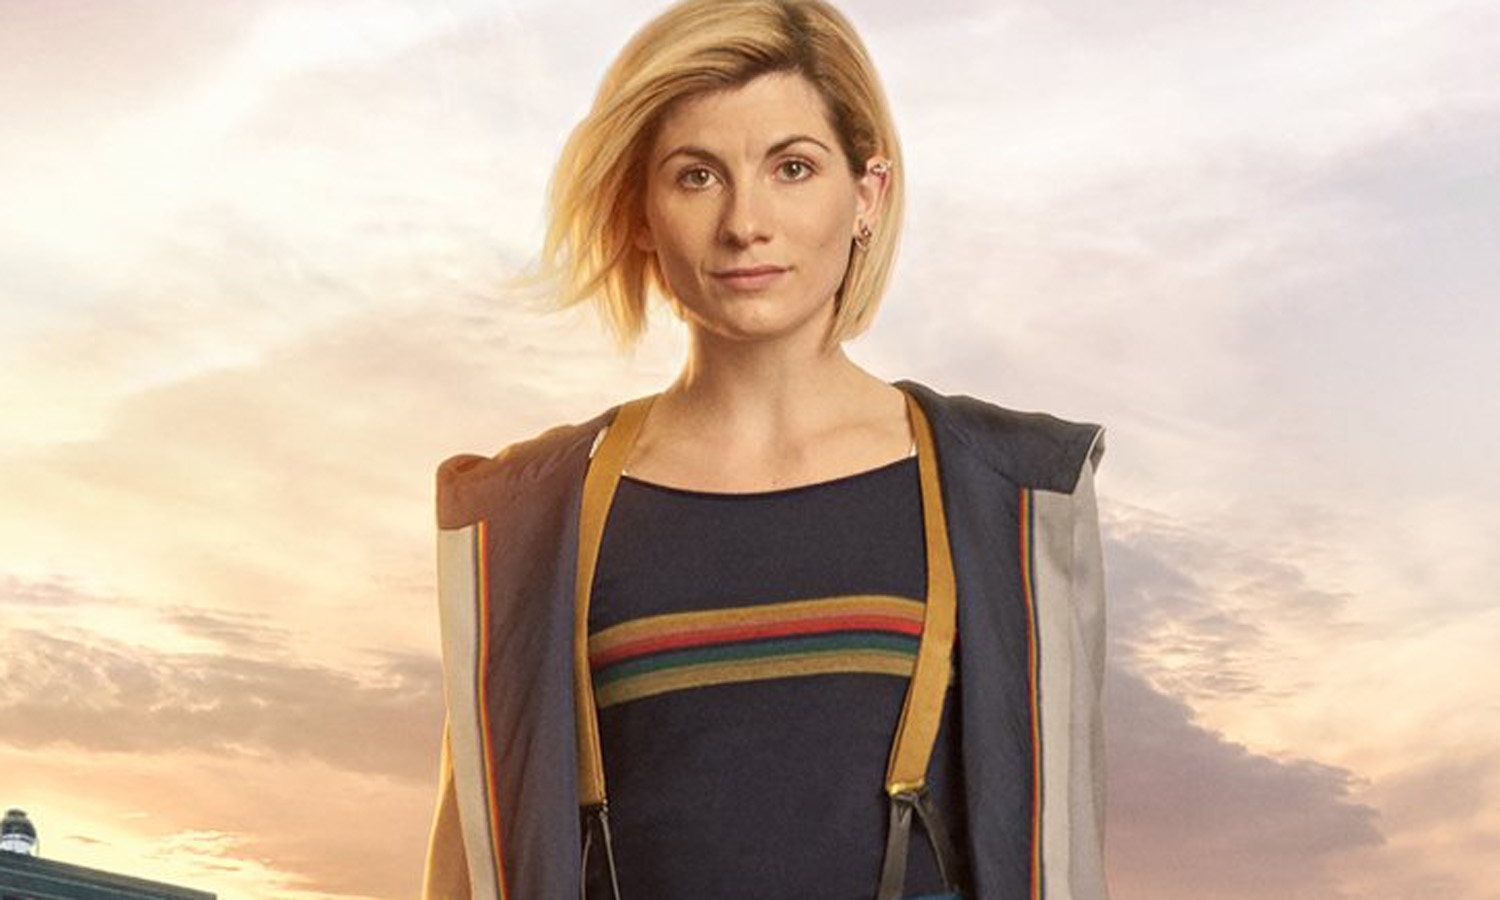 Here's the first look at new Doctor Who star Jodie Whittaker